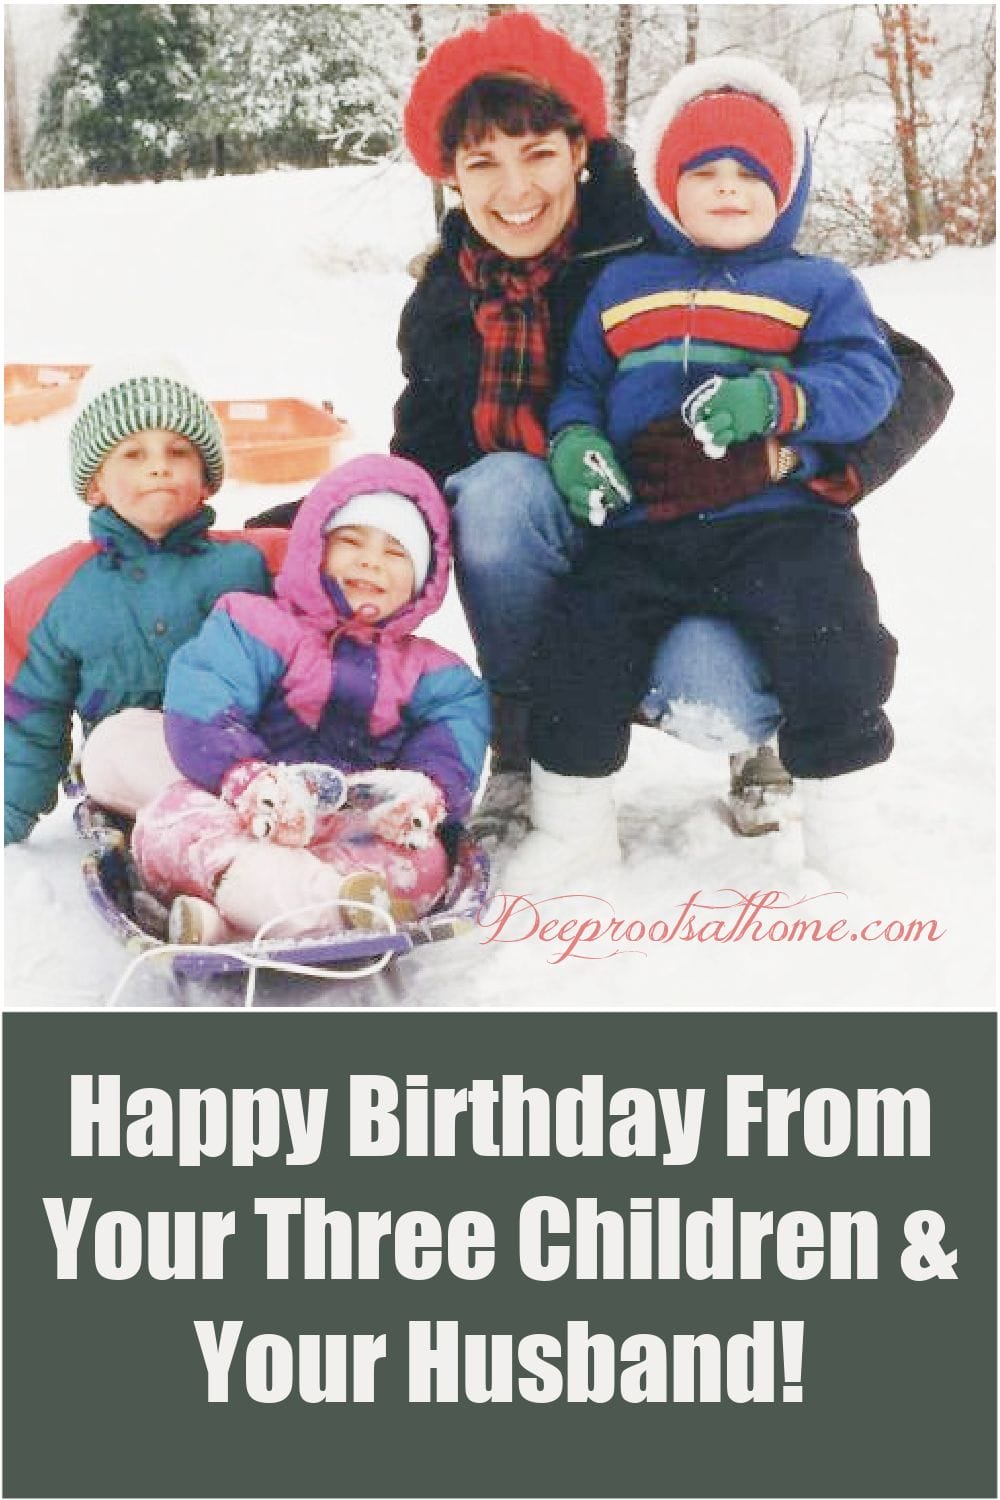 Happy Birthday From Your Three Children & Your Husband!